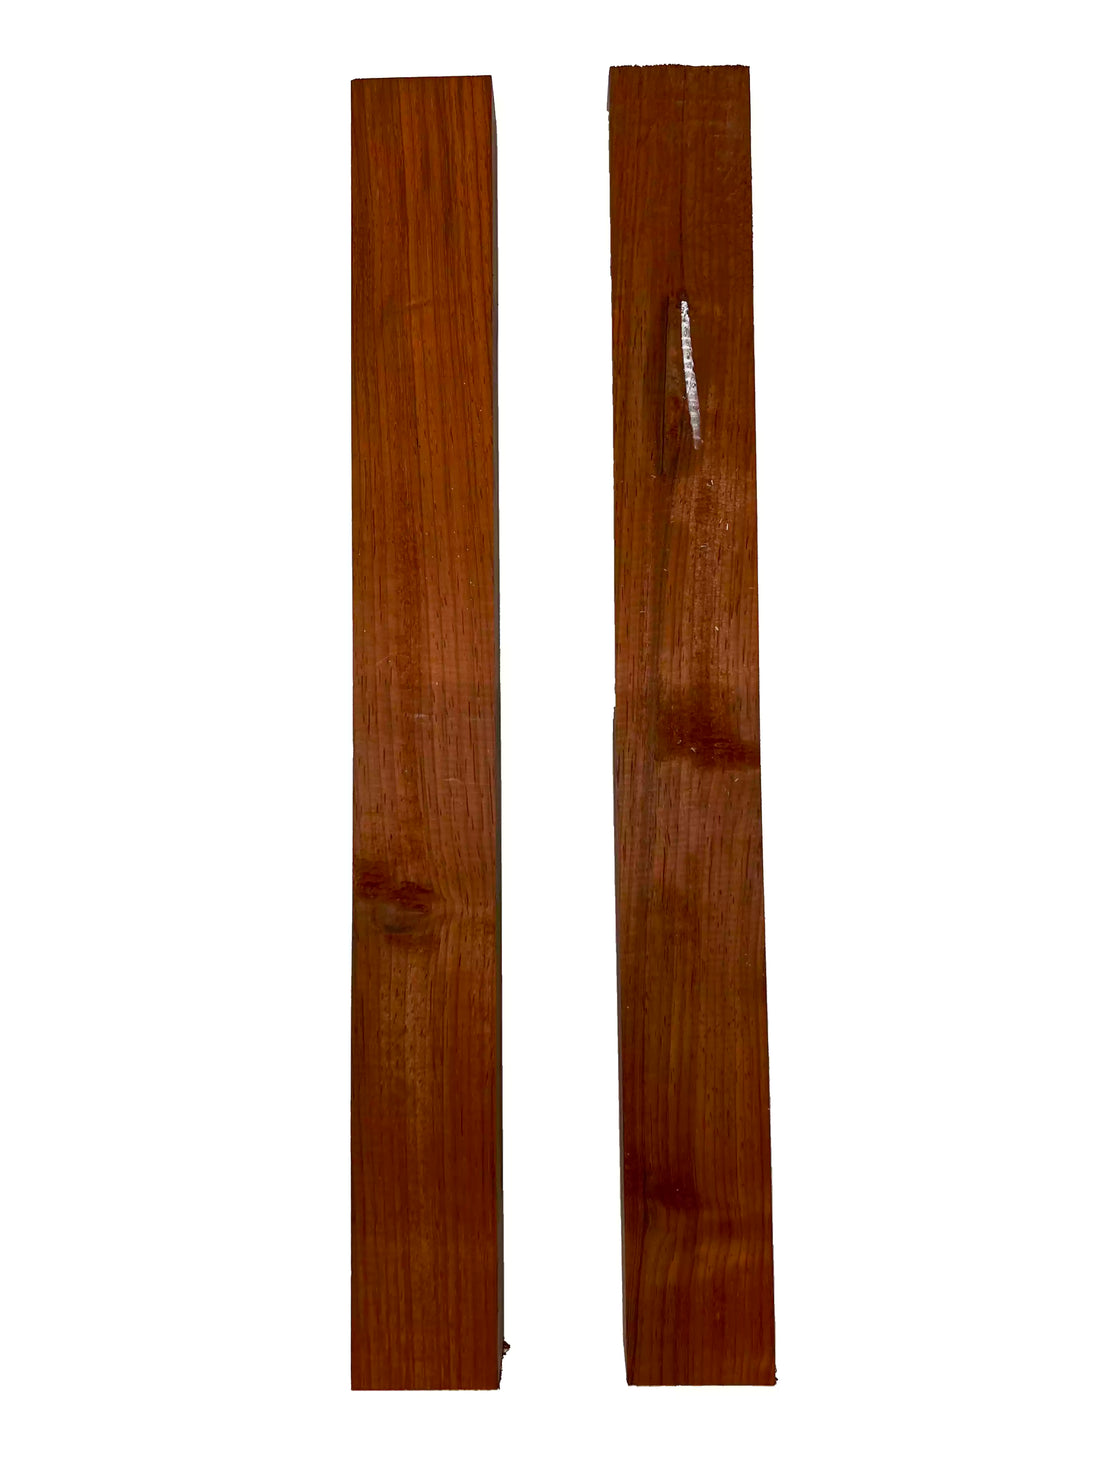 Pack of 2, African Padauk Thin Stock Three Dimensional Lumber Board Wood Blank 18&quot; x 2&quot; x 1&quot; 